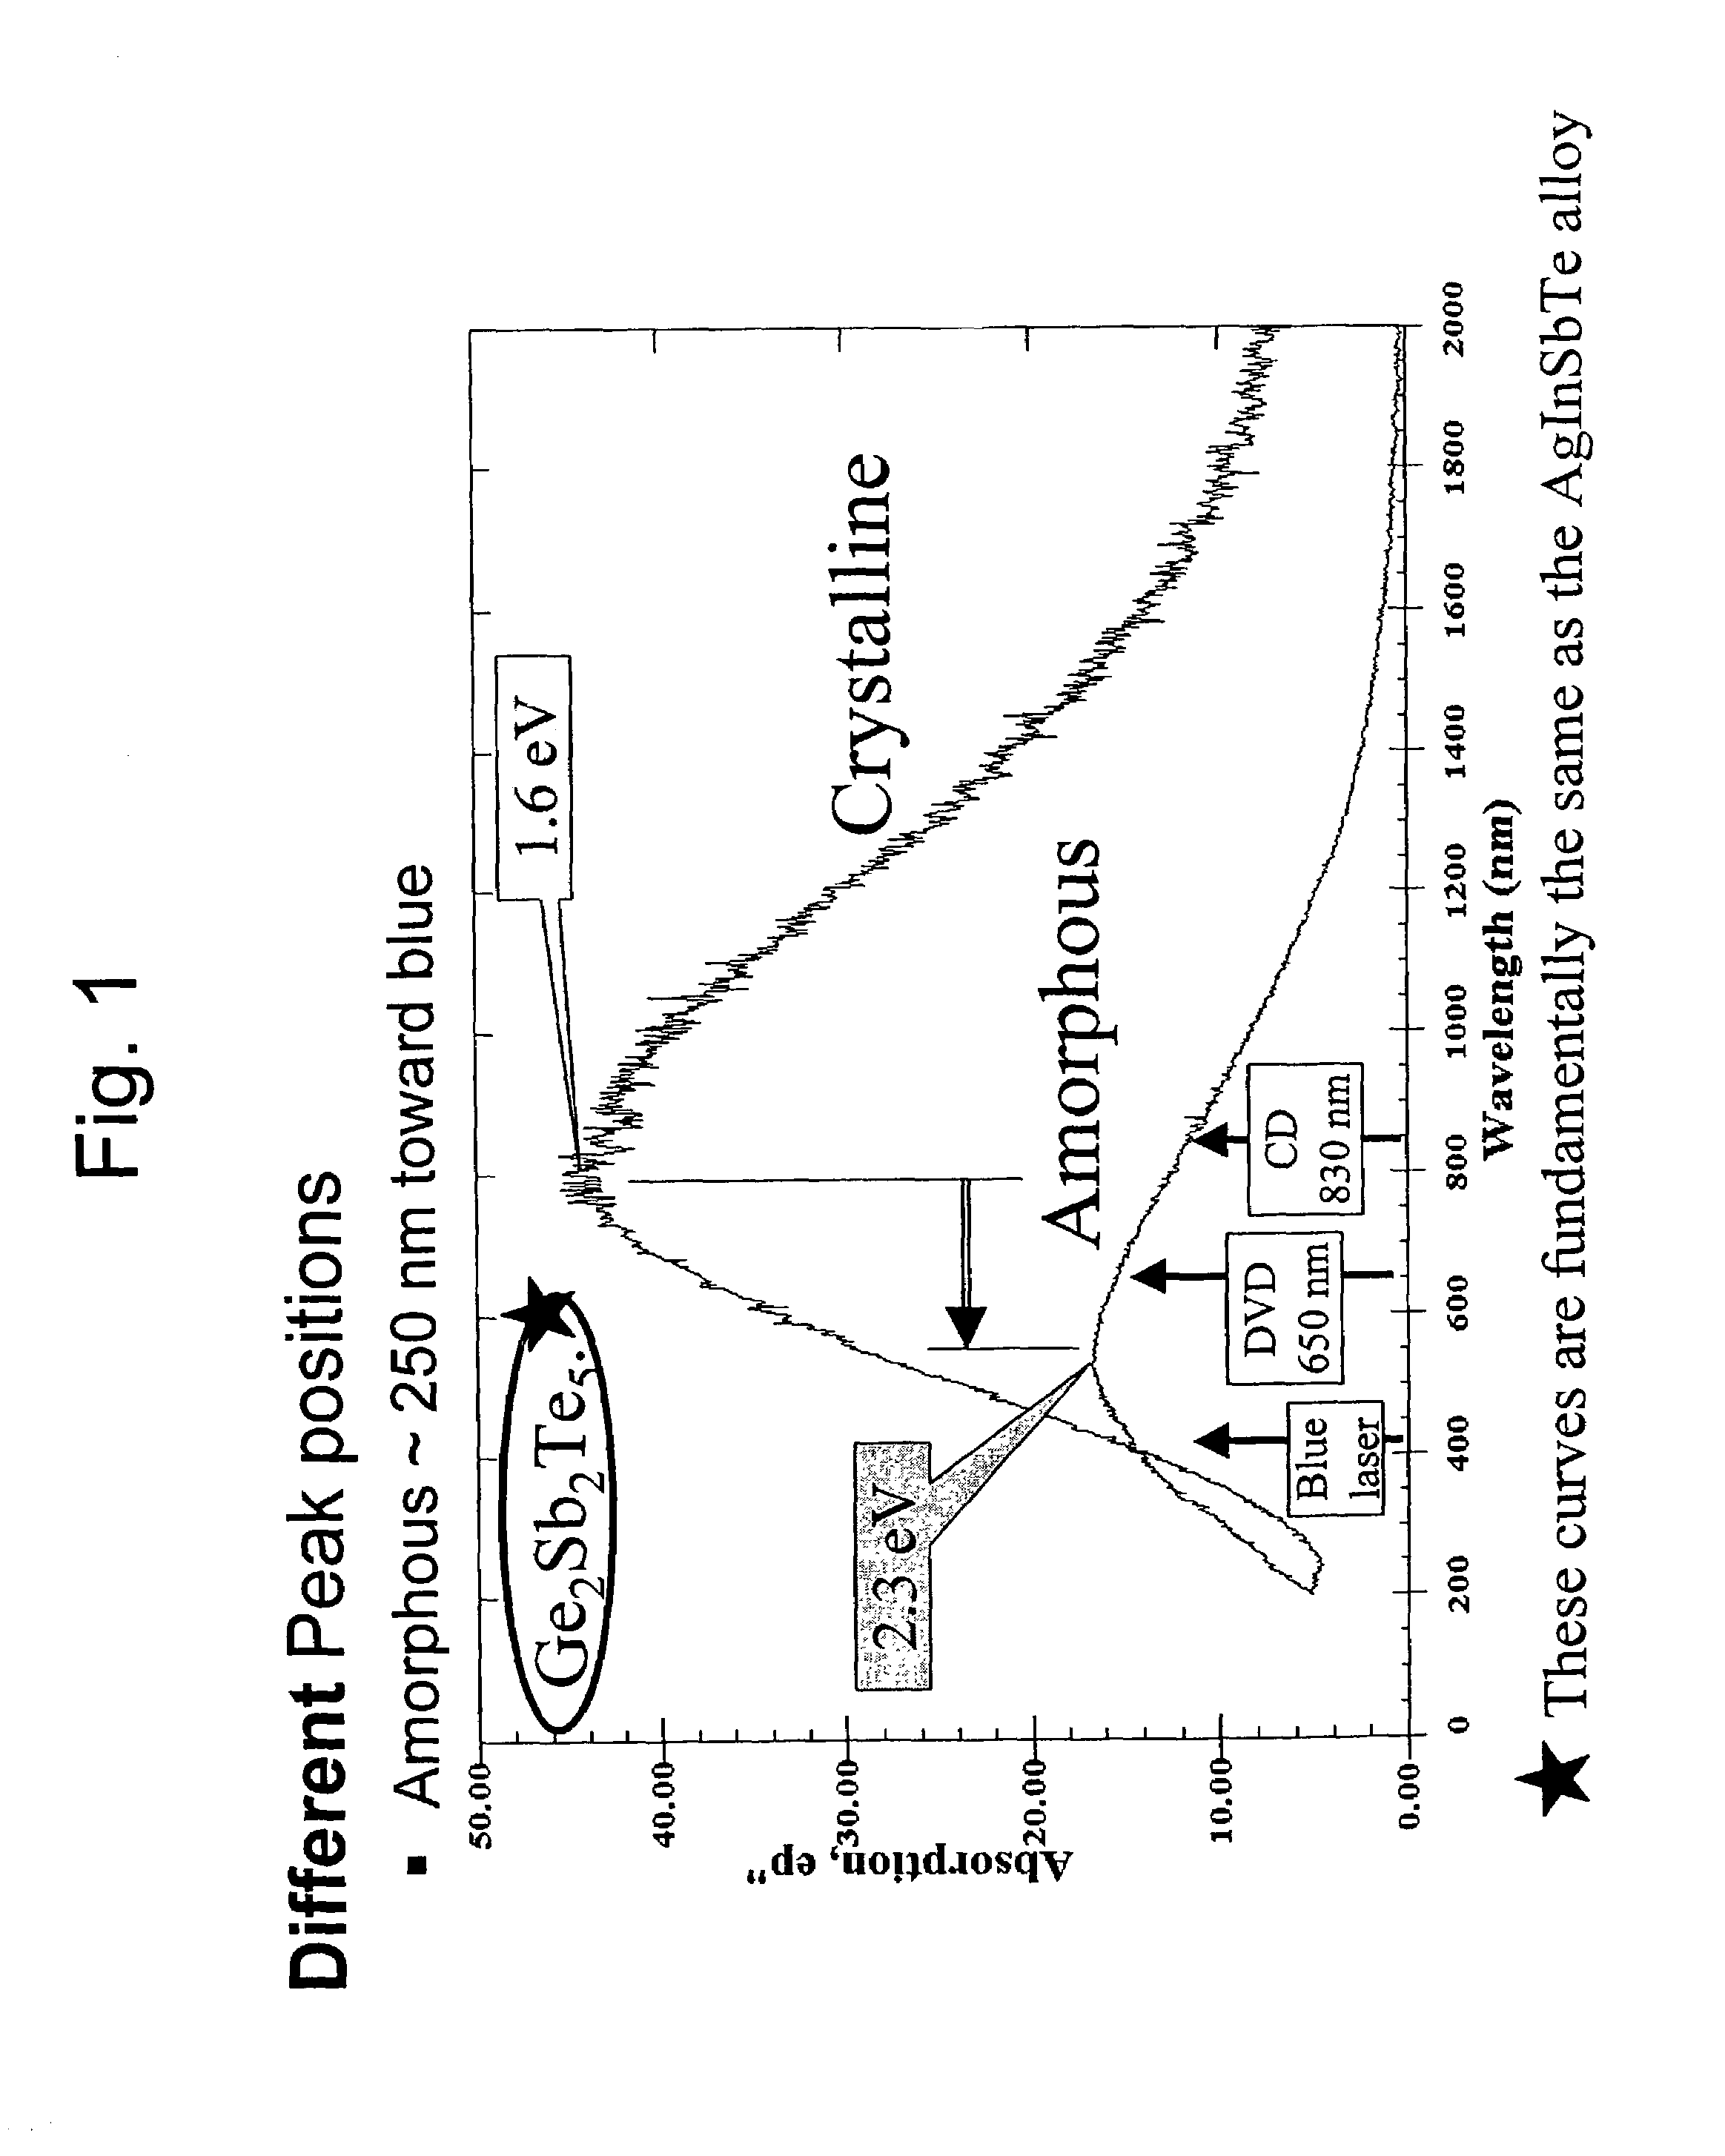 Increased data storage in optical data storage and retrieval systems using blue lasers and/or plasmon lenses